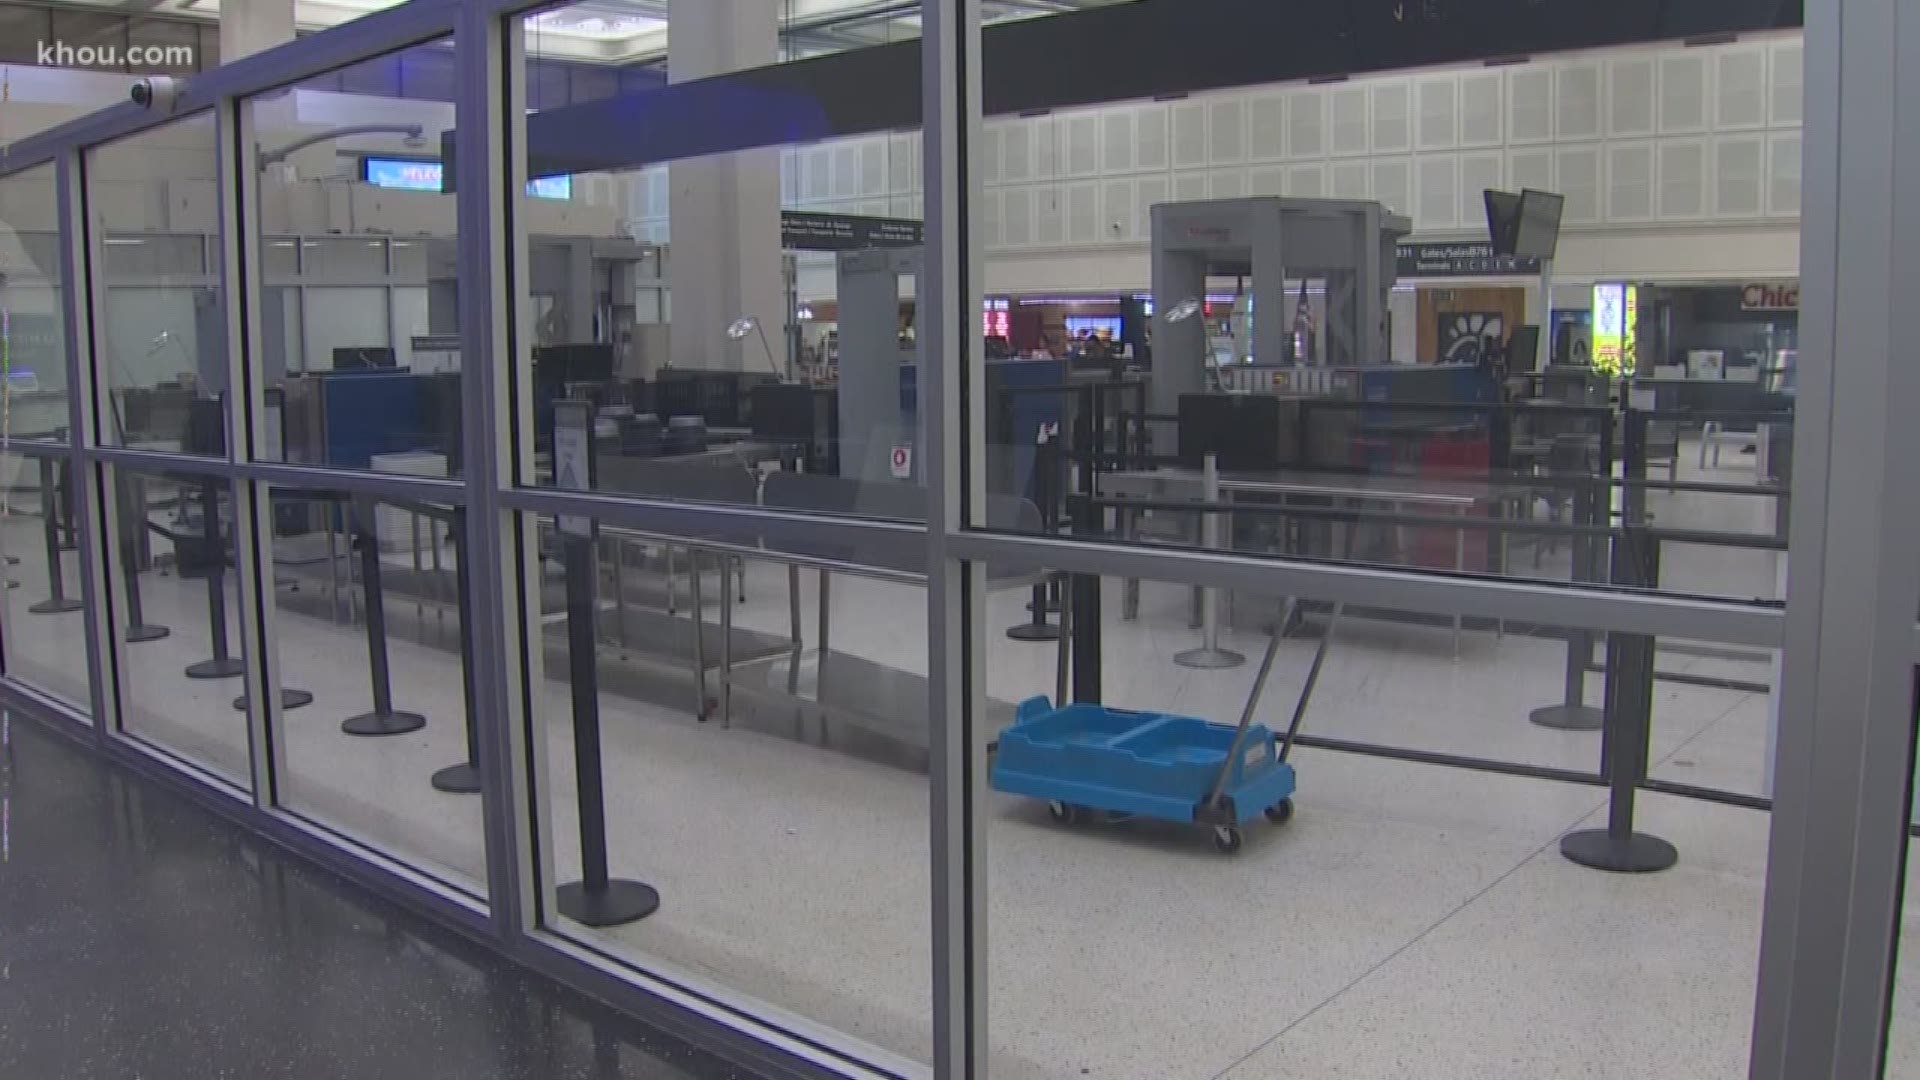 A major travel hub in Houston was disrupted Sunday because of TSA staffing  issues attributed to the partial government shutdown.